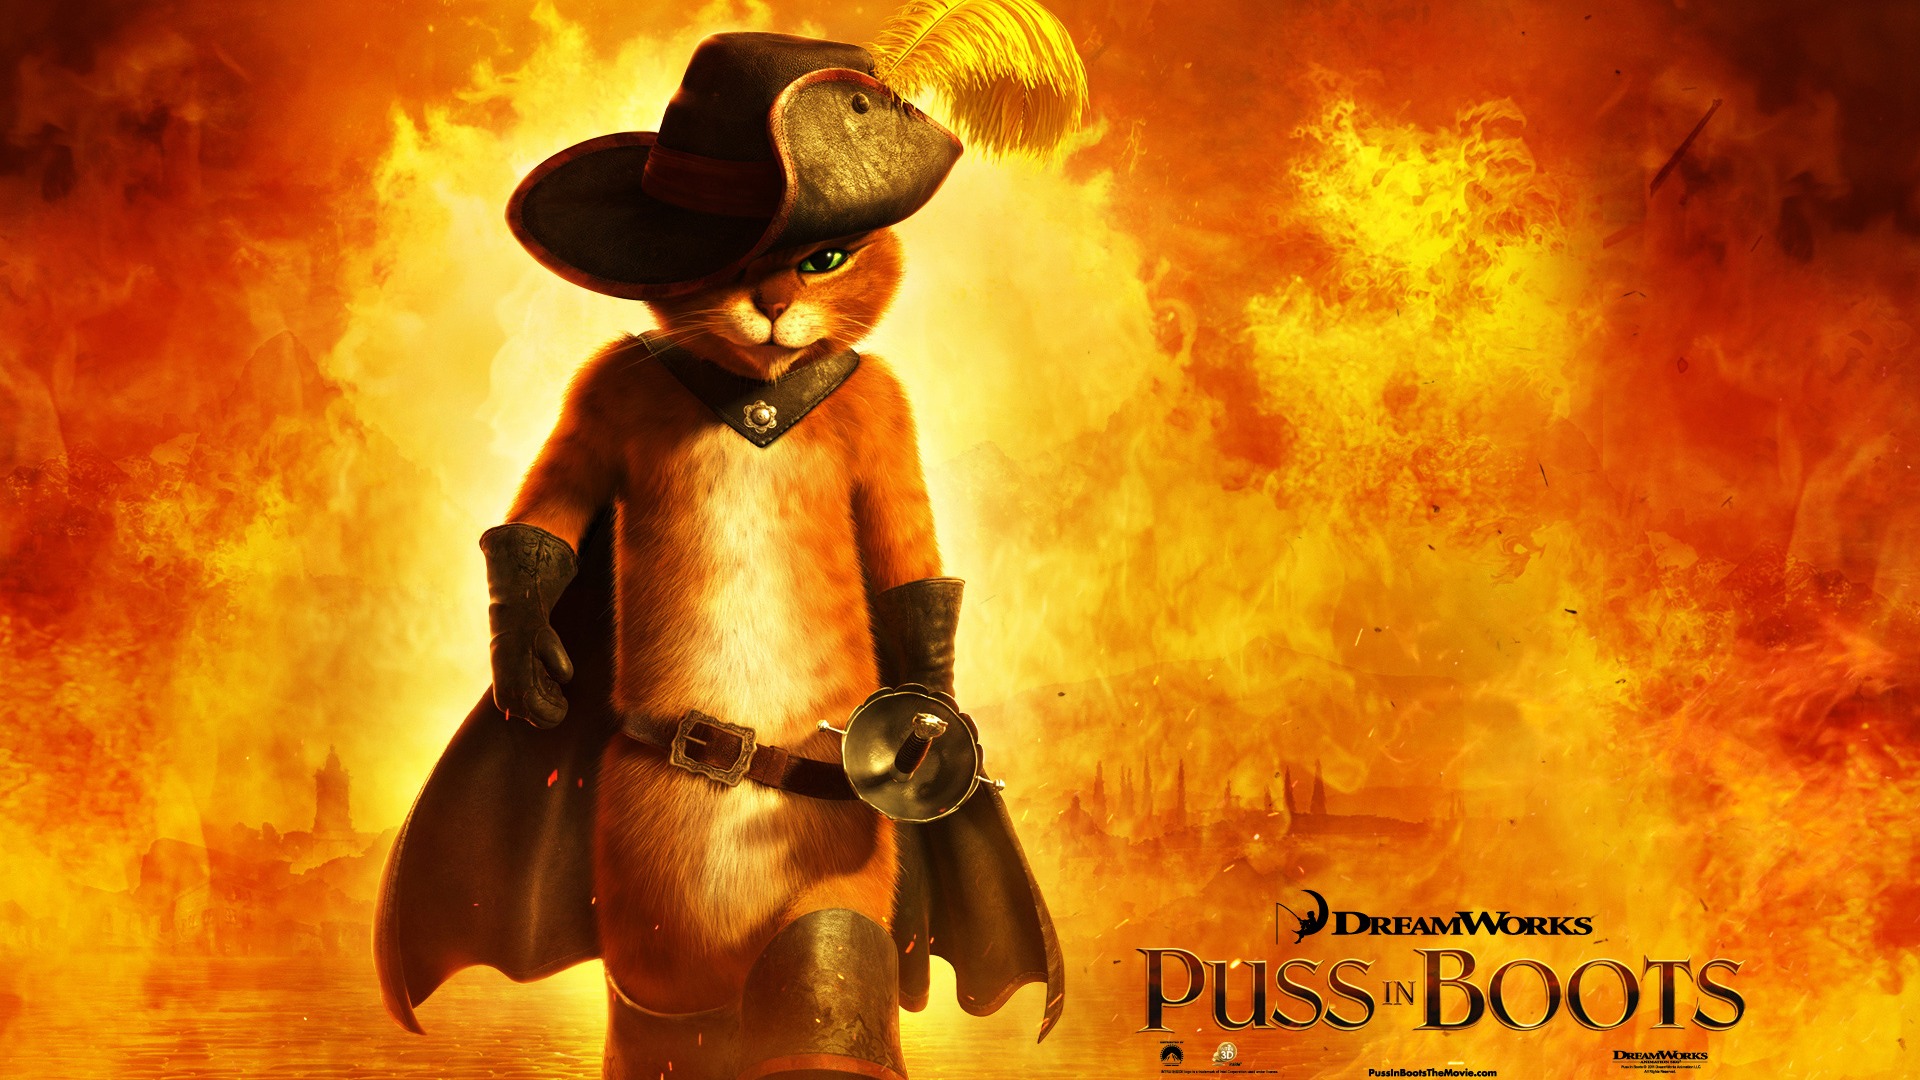 Puss in Boots HD wallpapers #1 - 1920x1080